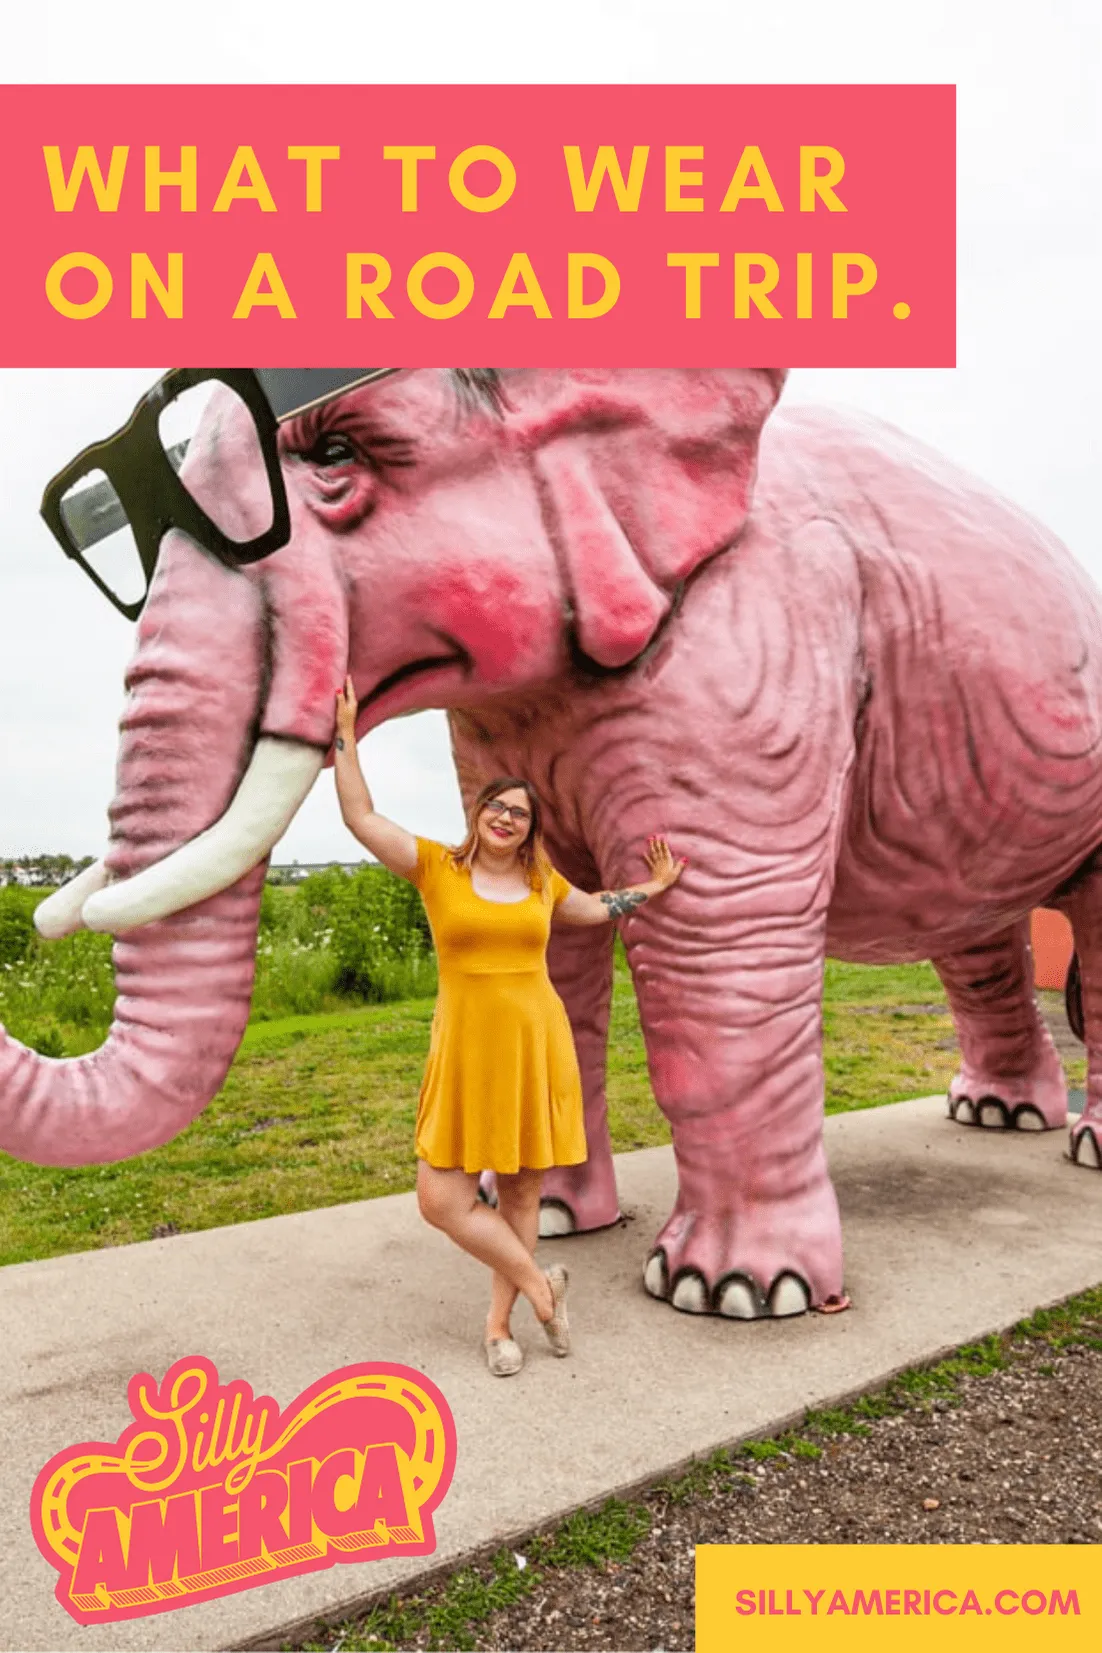 Are you gearing up for a long car trip, packing your bags, and left wondering what to wear on a road trip? Read on for all my tips for comfy road trip outfits and more of what to pack in your luggage.  #RoadTripOutfitIdeas #RoadTripOutfit #RoadTripAesthetic #WhatToWearOnARoadTrip  #RoadTripPacking #RoadTripPackingCar #RoadTripPackingList #RoadTripPackingClothes #RoadTripPackingFOrAdults  #RoadTripPackingTips #RoadTripPackingEssentials #RoadTripPackingIdeas #LongRoadTripPacking 